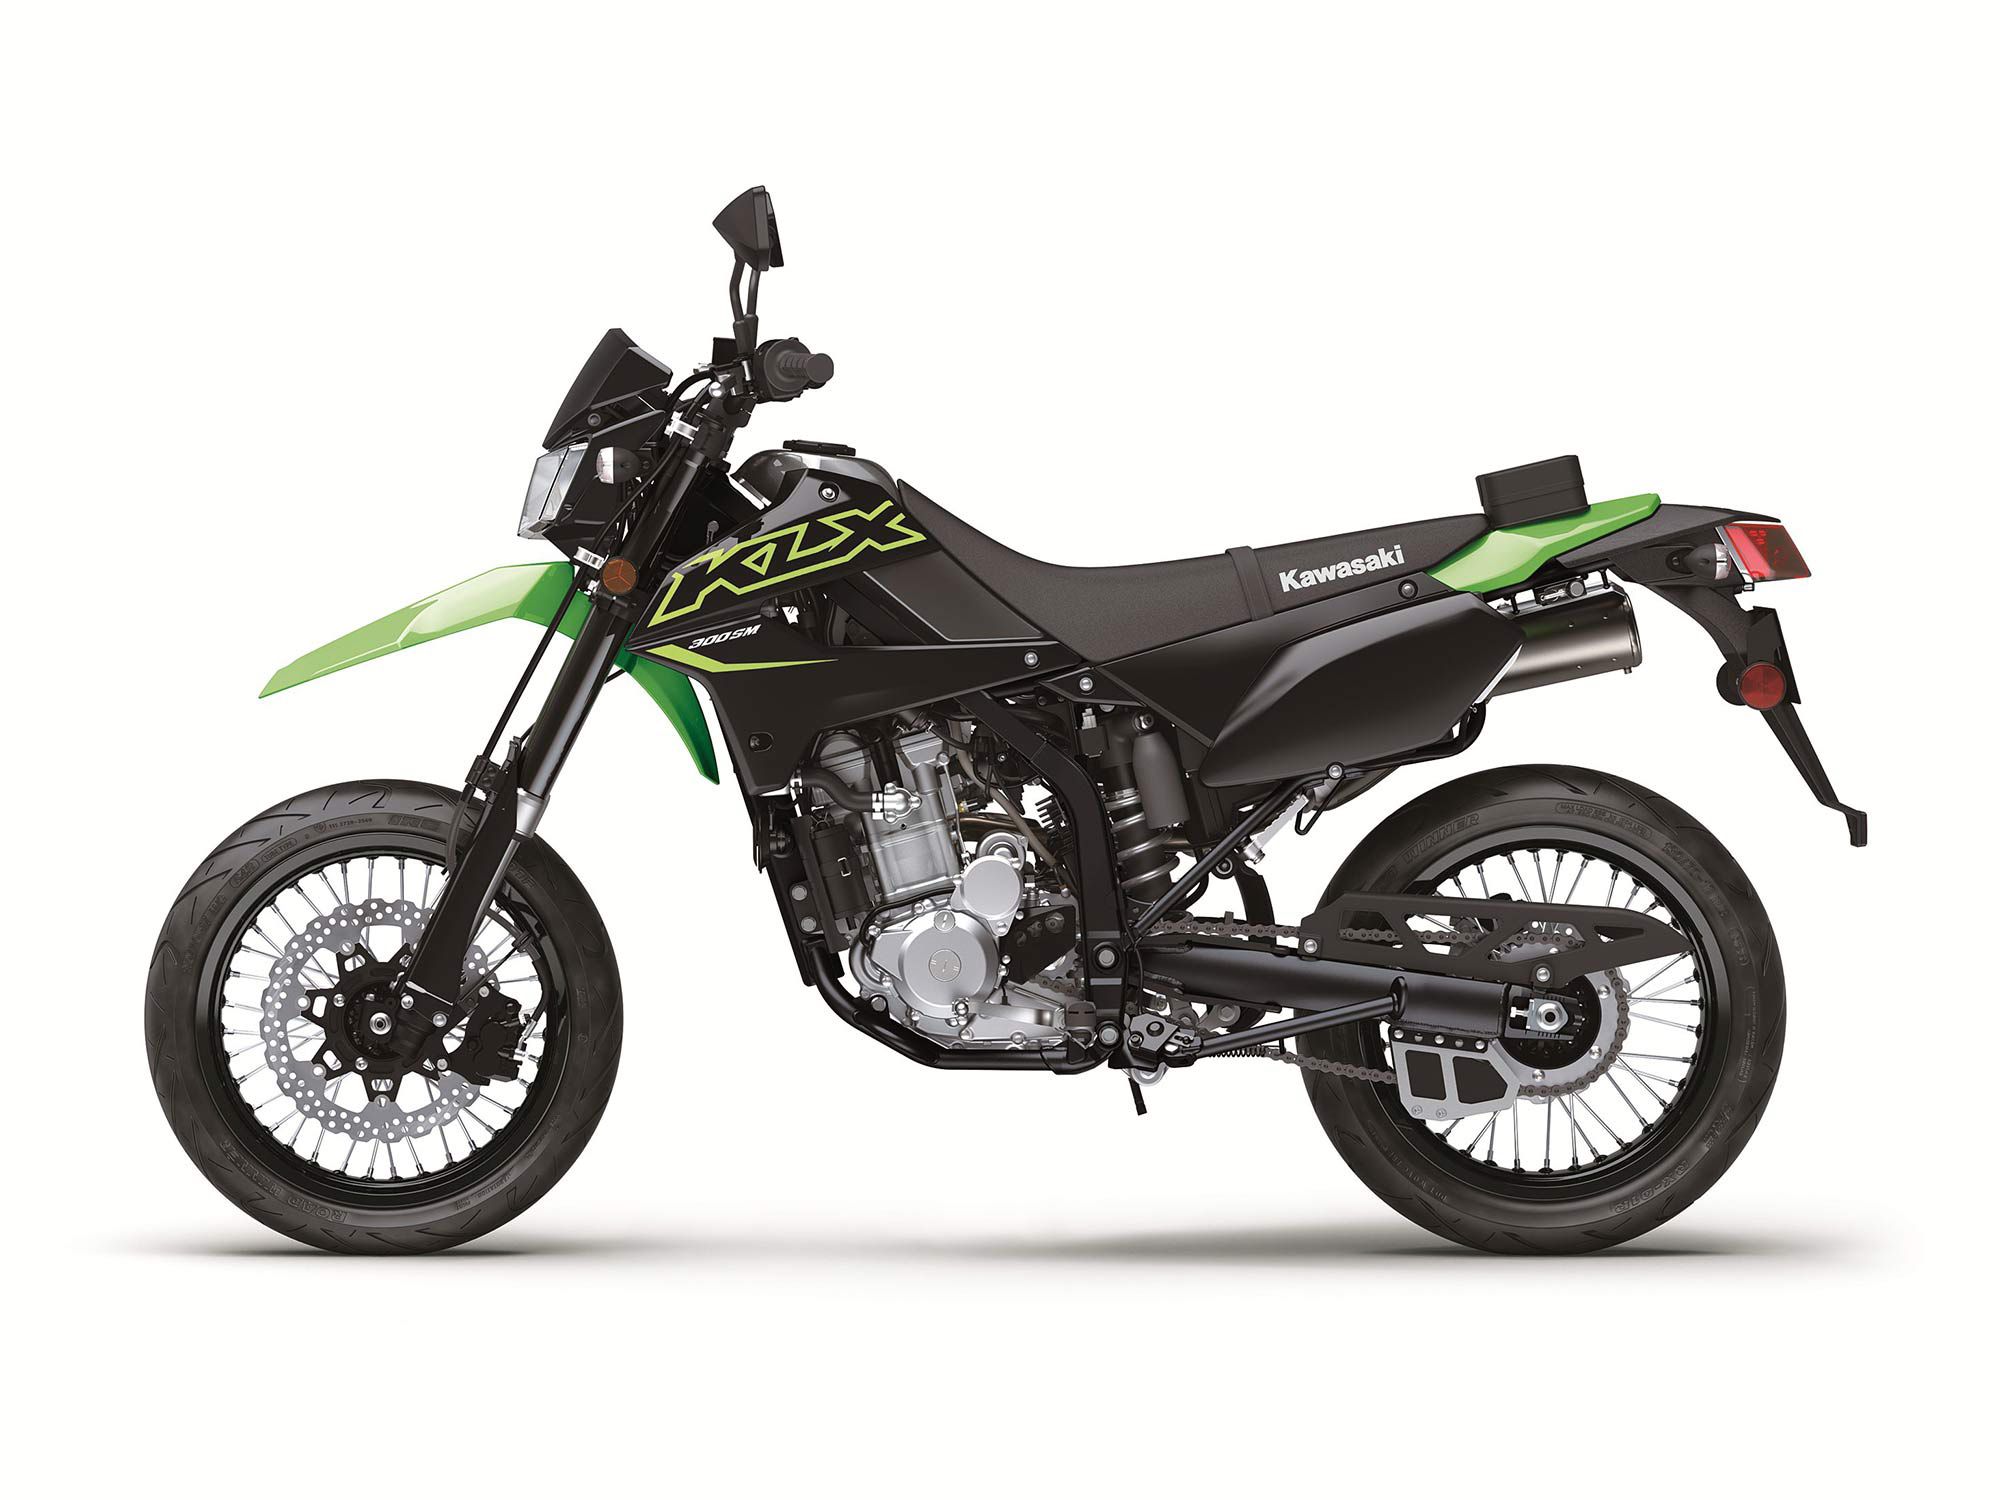 Like the other KLX300 variants, the SM is powered by an approachable 292cc DOHC liquid-cooled single.